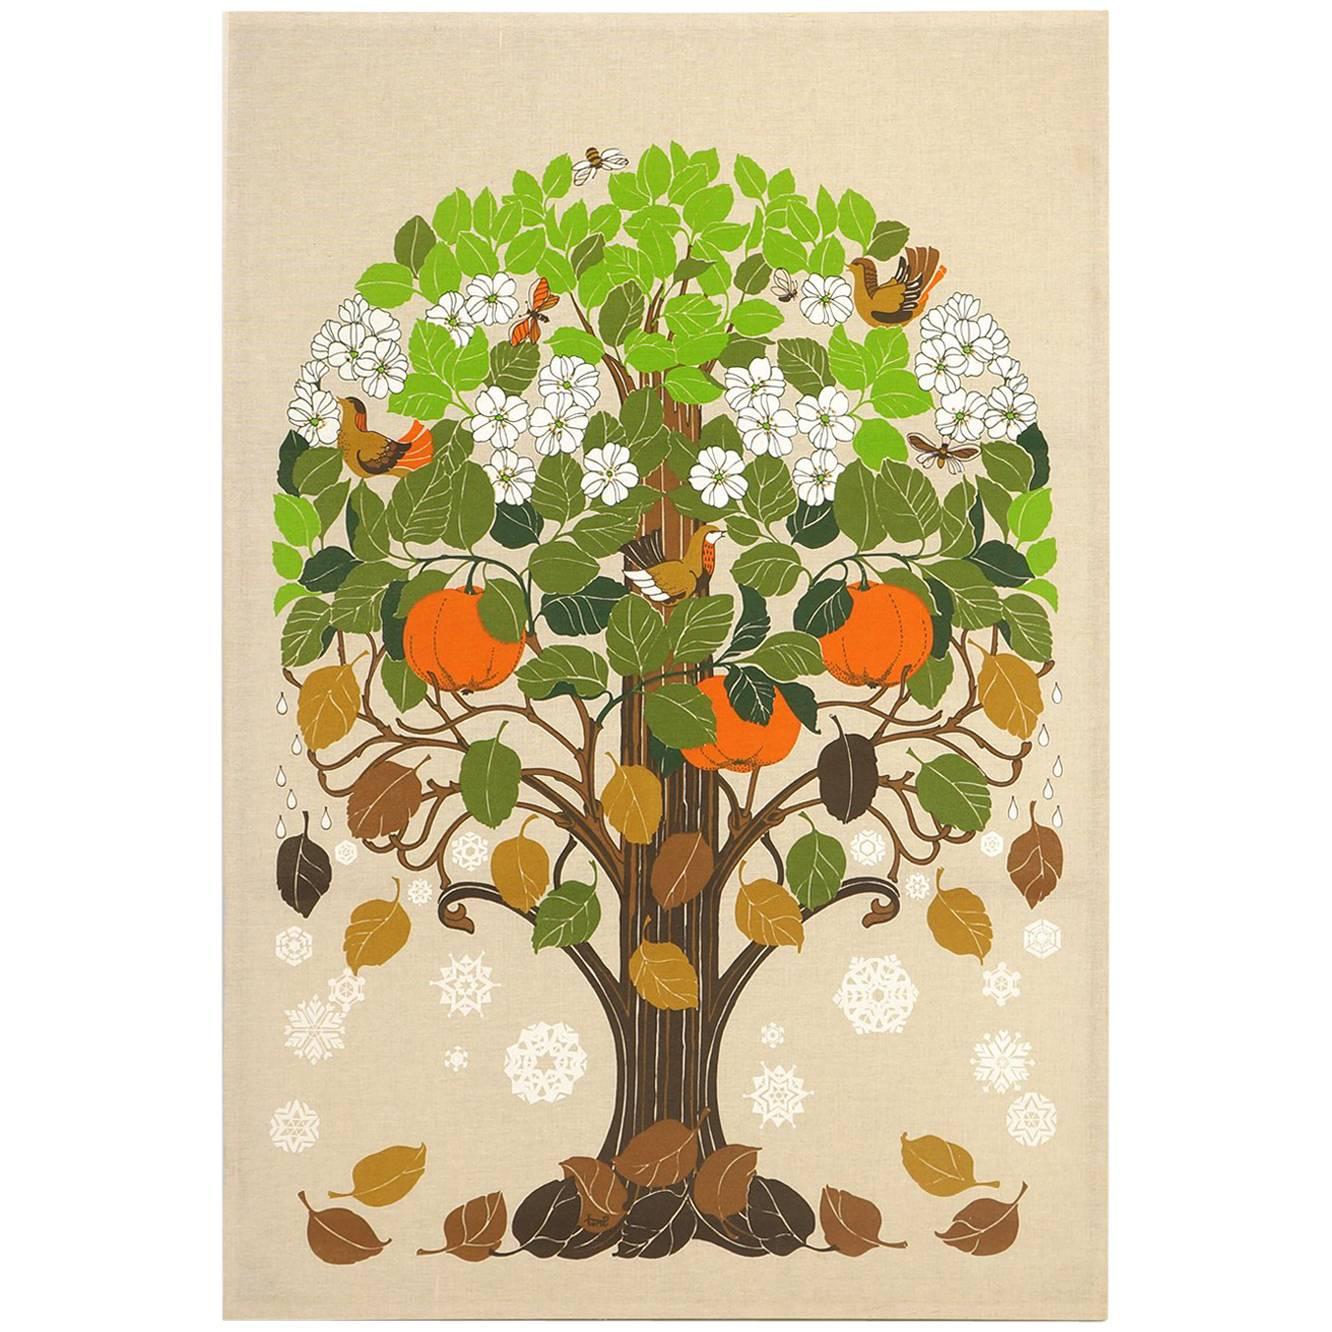 Seasons Tree Print on Cloth by Toni Hermansson for Almedahls, Sweden, 1960s